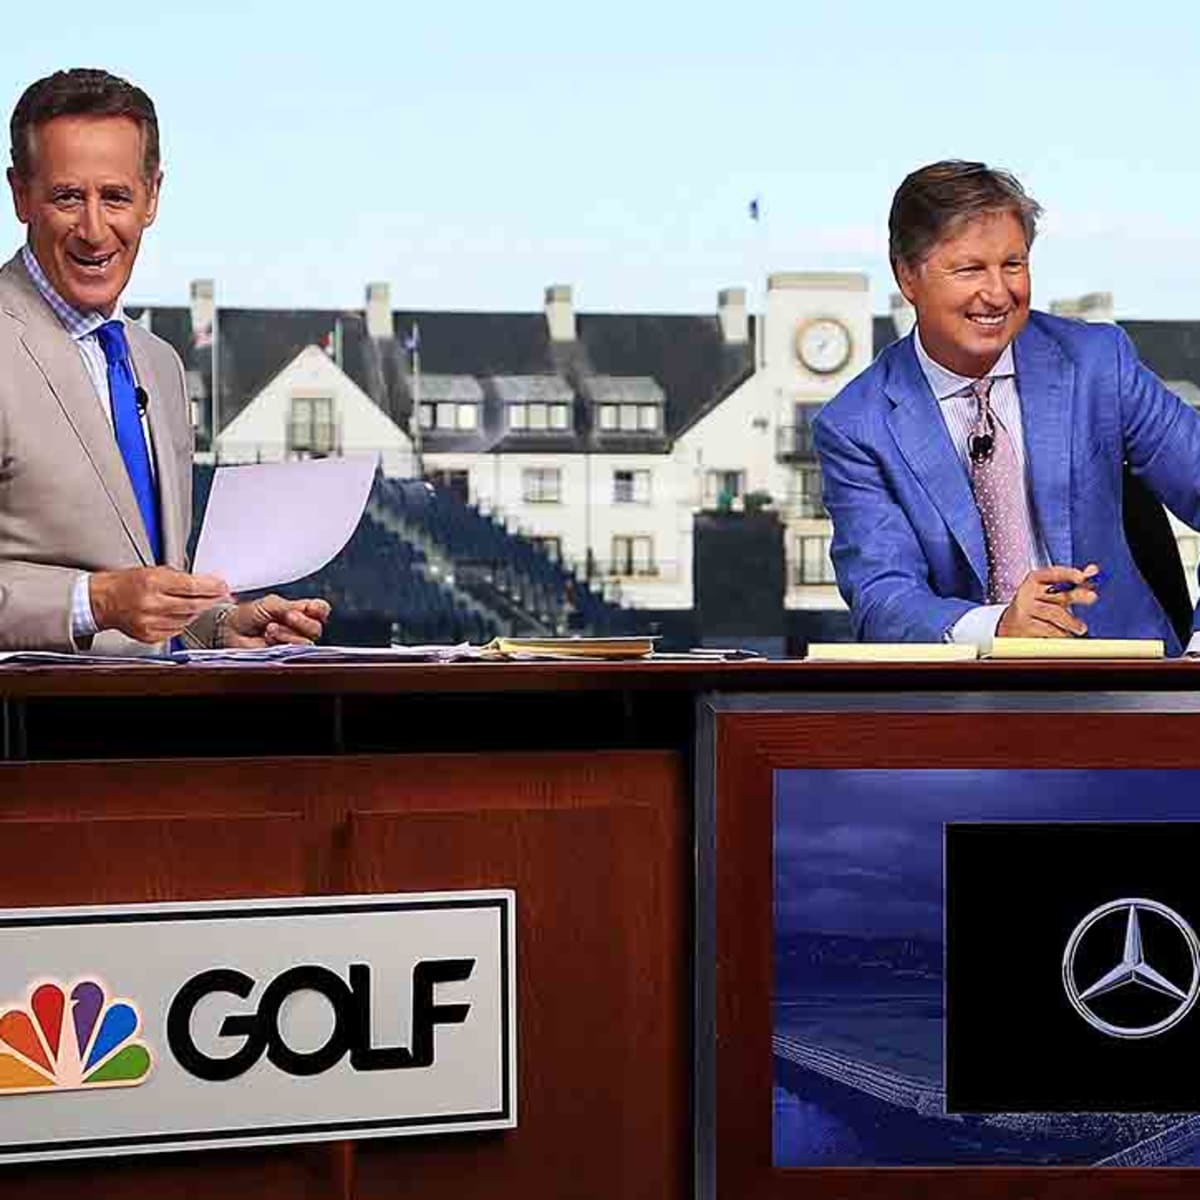 Brandel Chamblee-led Live From continues to deliver as Golf Channels best program